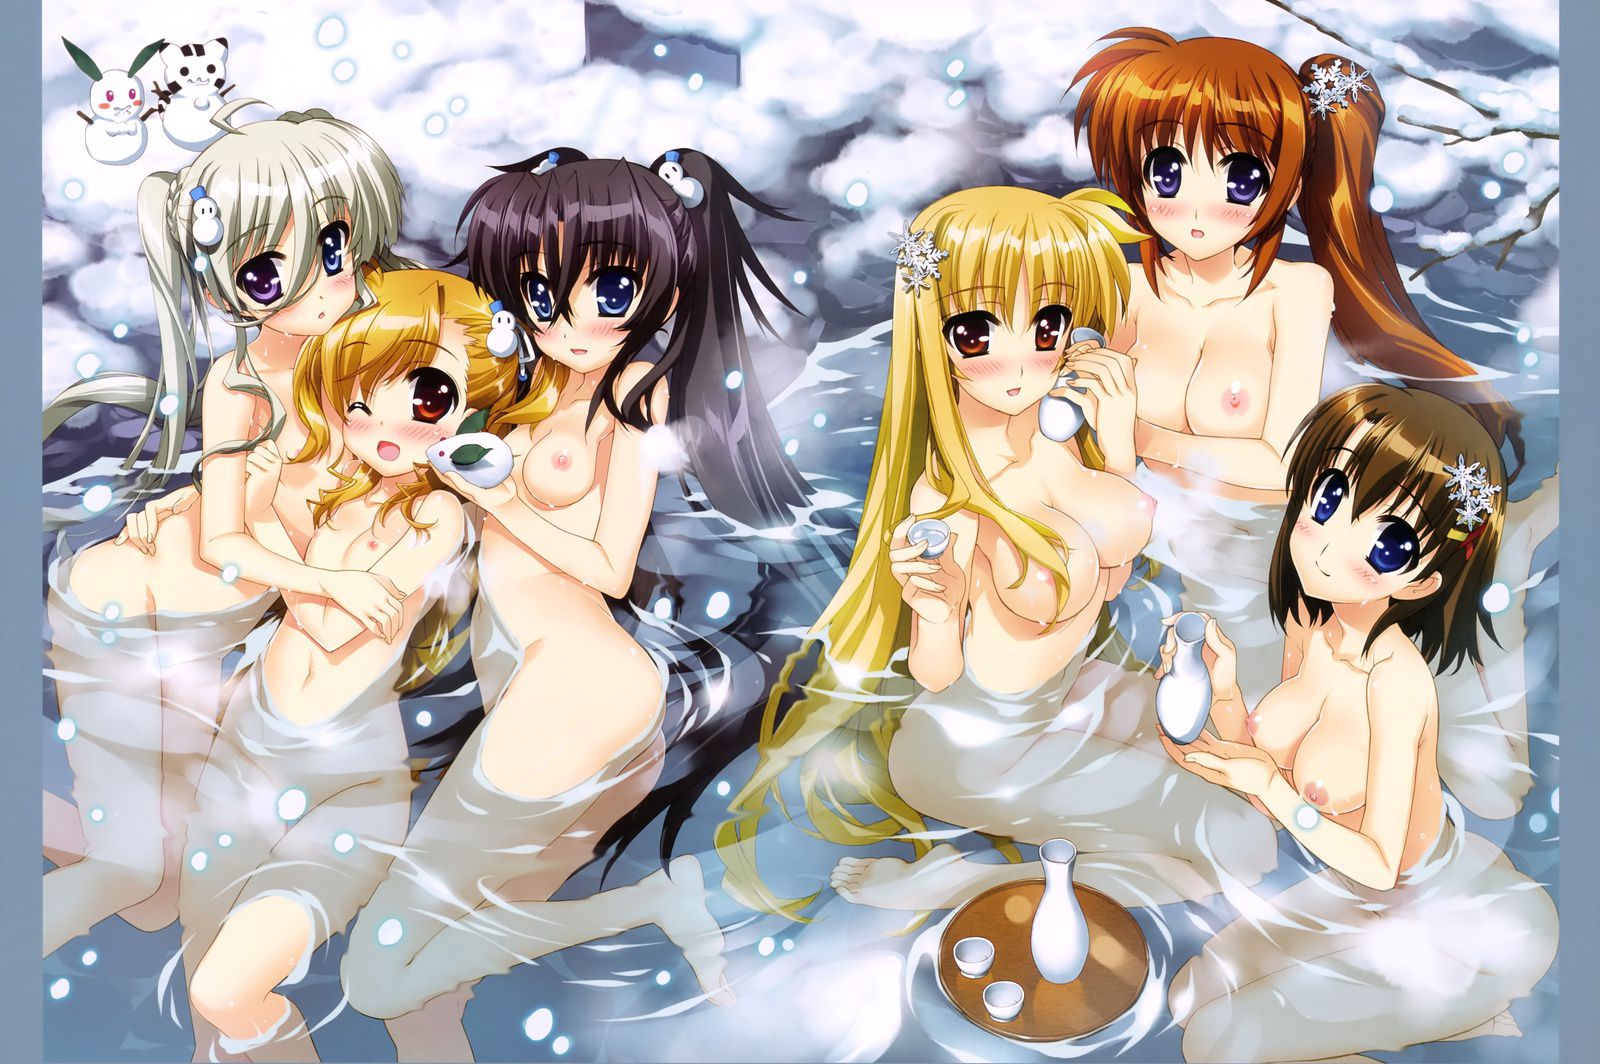 [Magical Girl Lyrical Nanoha] is a thread that will put a random image of erotic 1